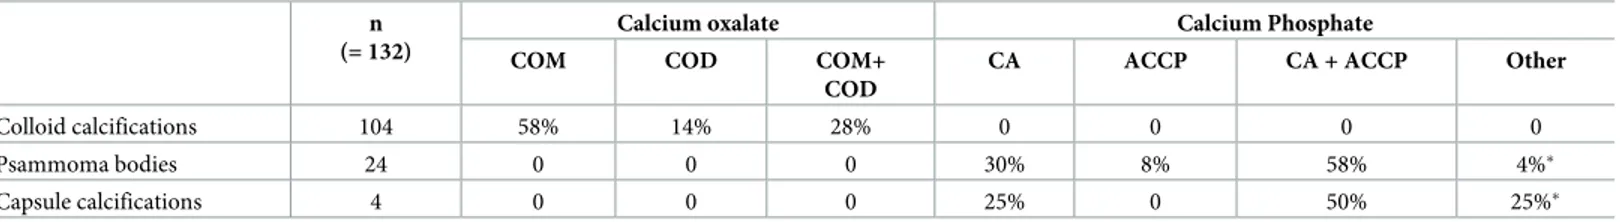 Table 2. Composition of crystal deposits in thyroid samples according to their location.